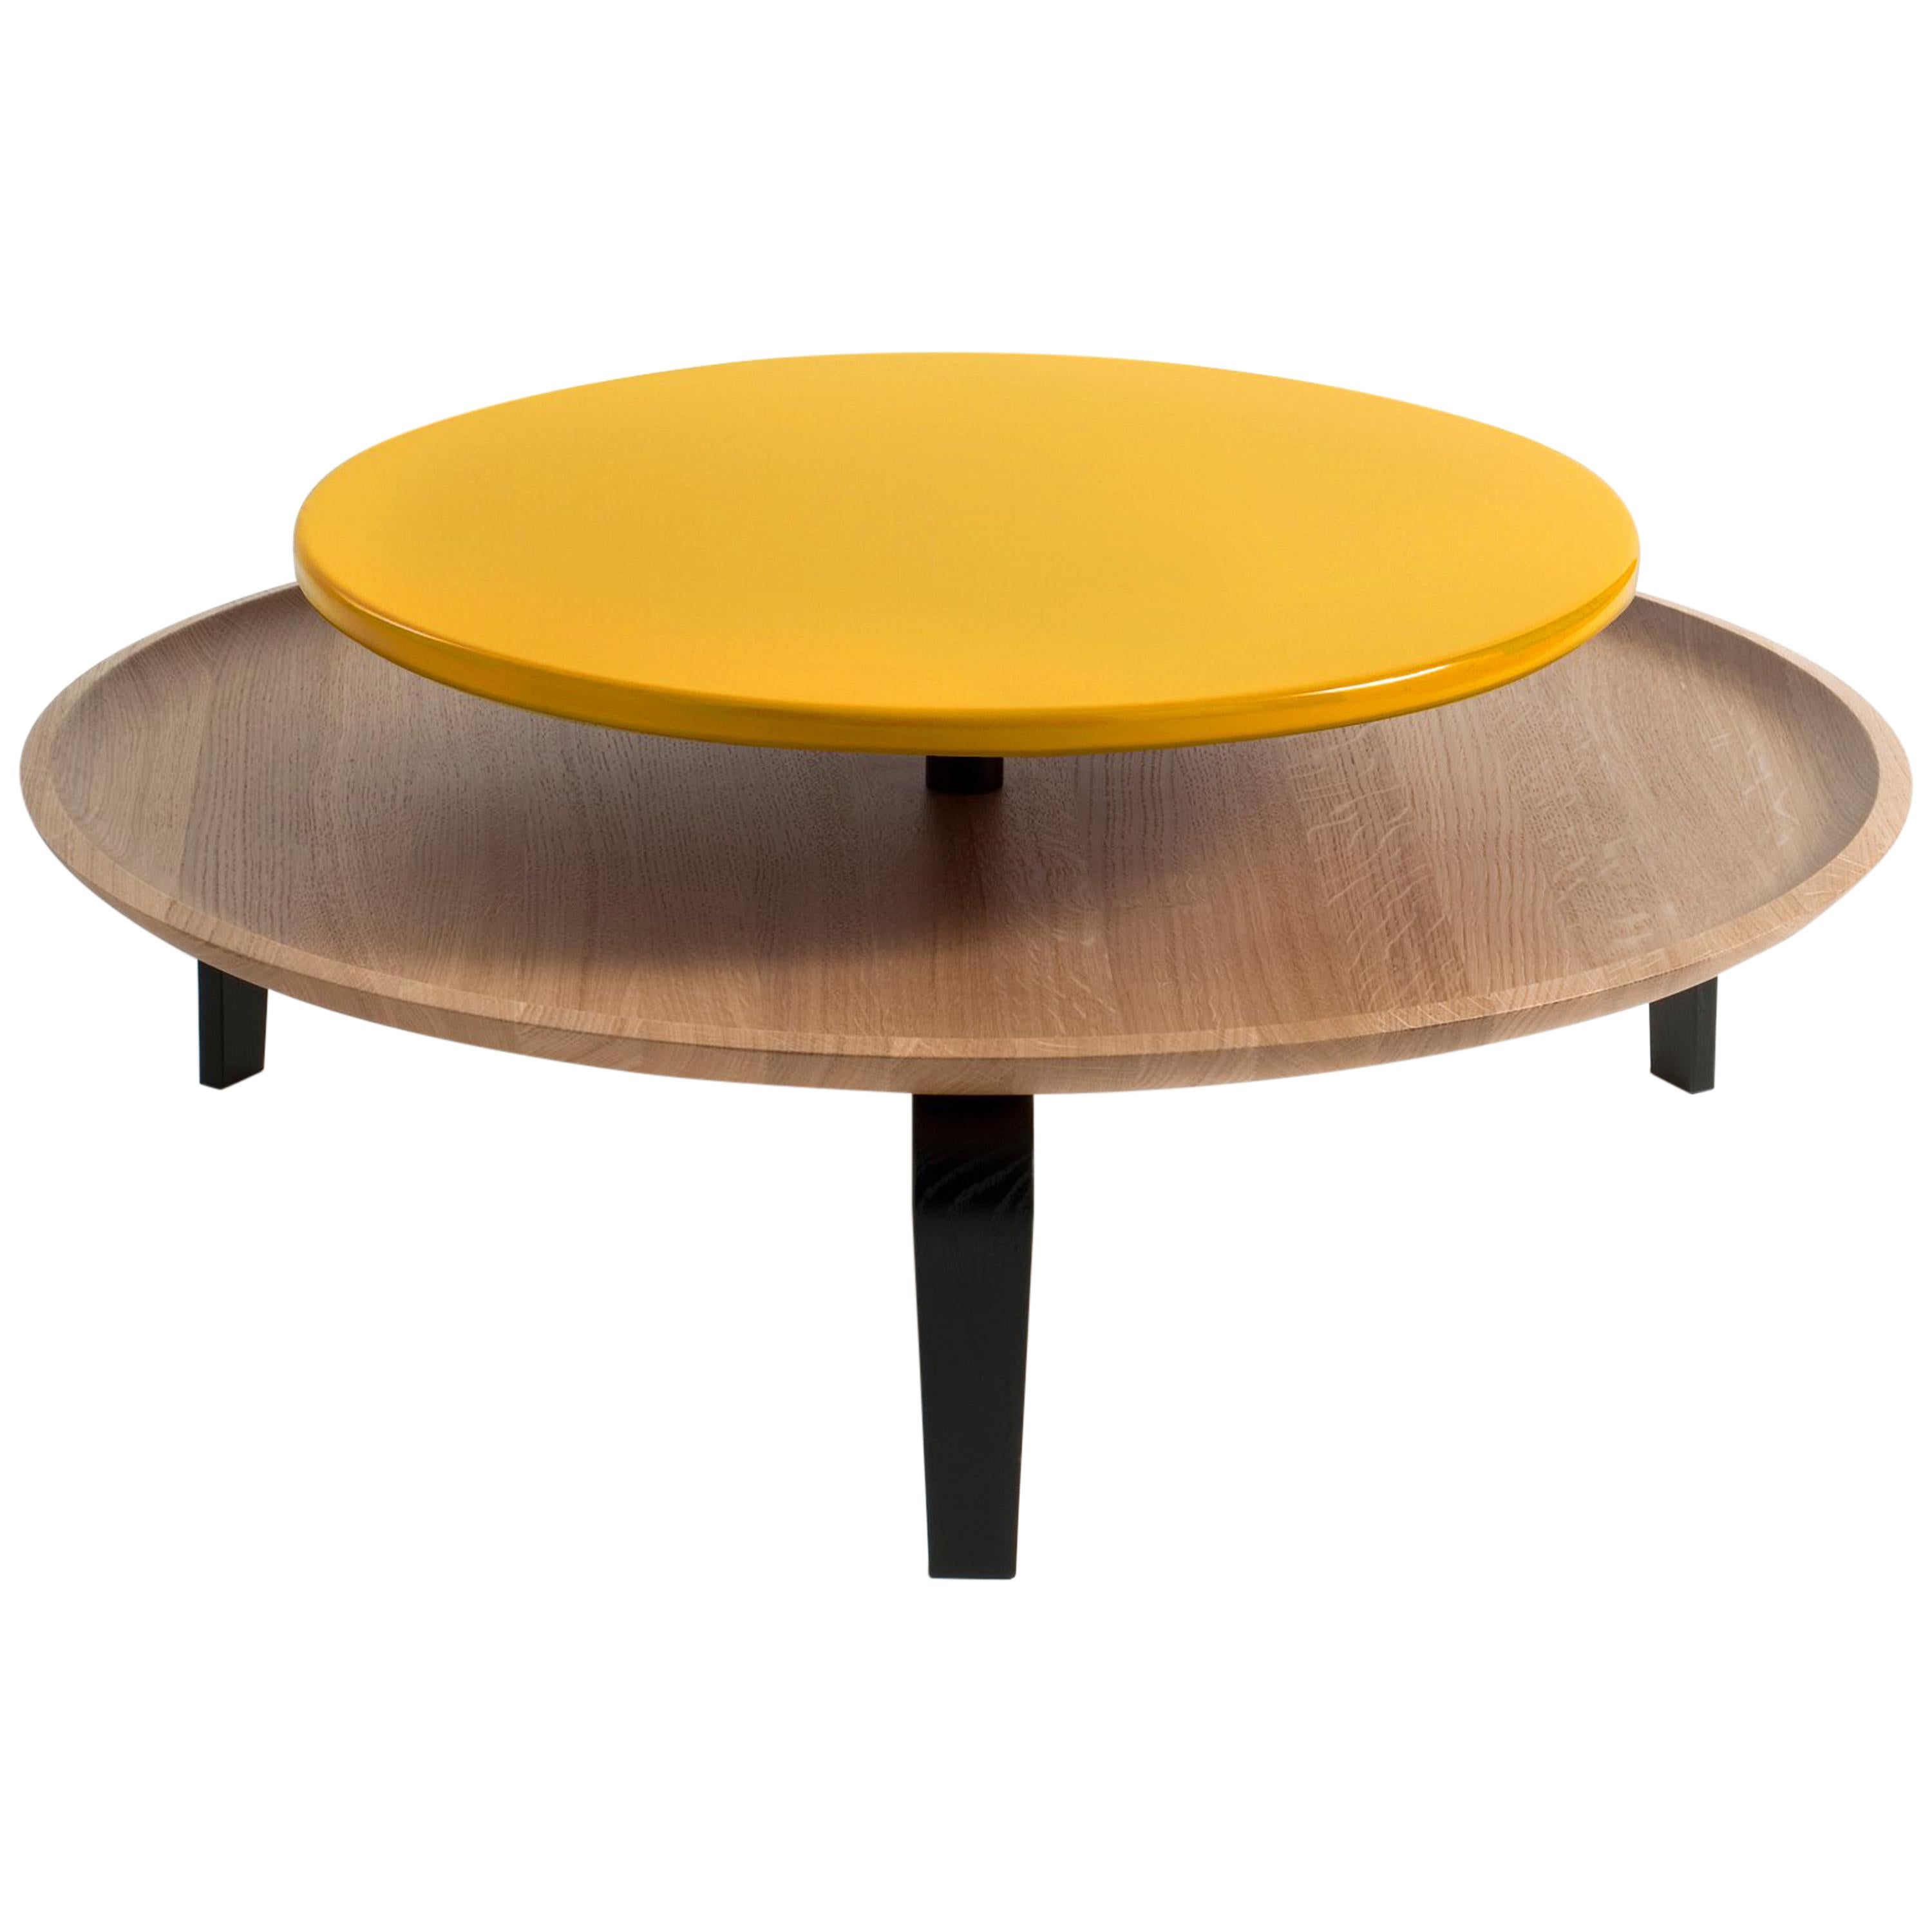 Secreto Round Coffee Table by Colé, Natural Oak and Yellow Lacquered Top